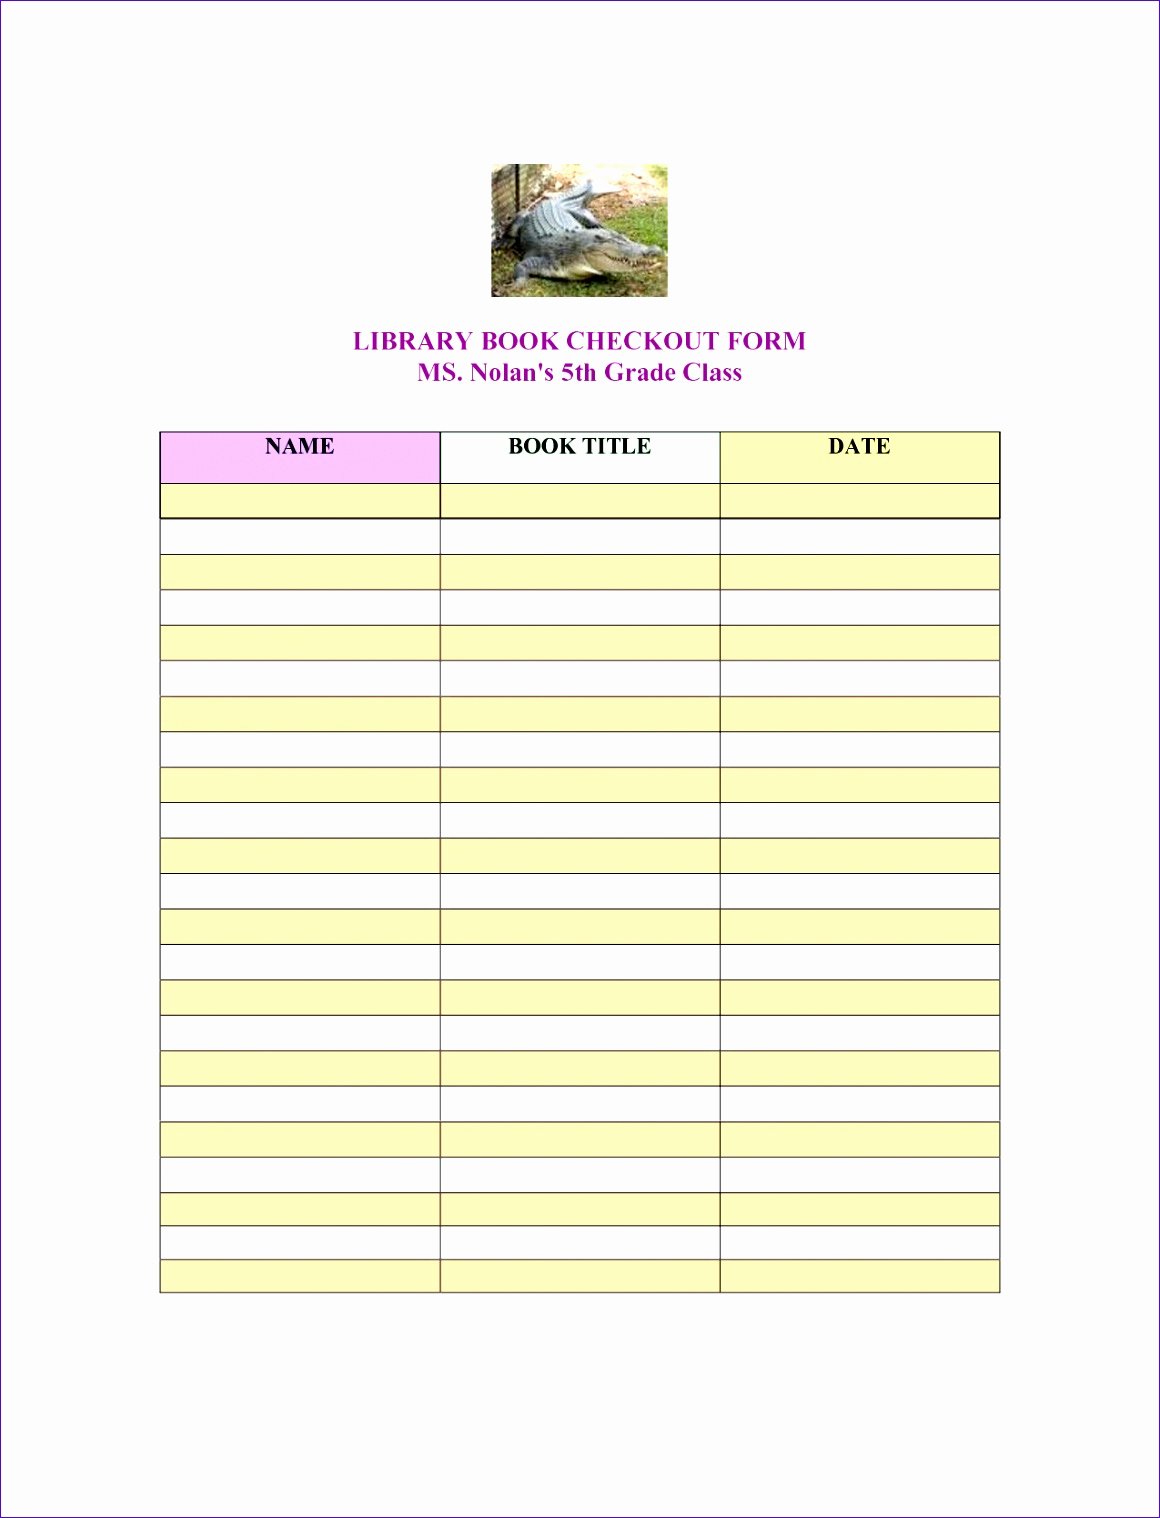 Library Checkout Cards Template Lovely Library Book Checkout Sheet Haojc Ideas Best S